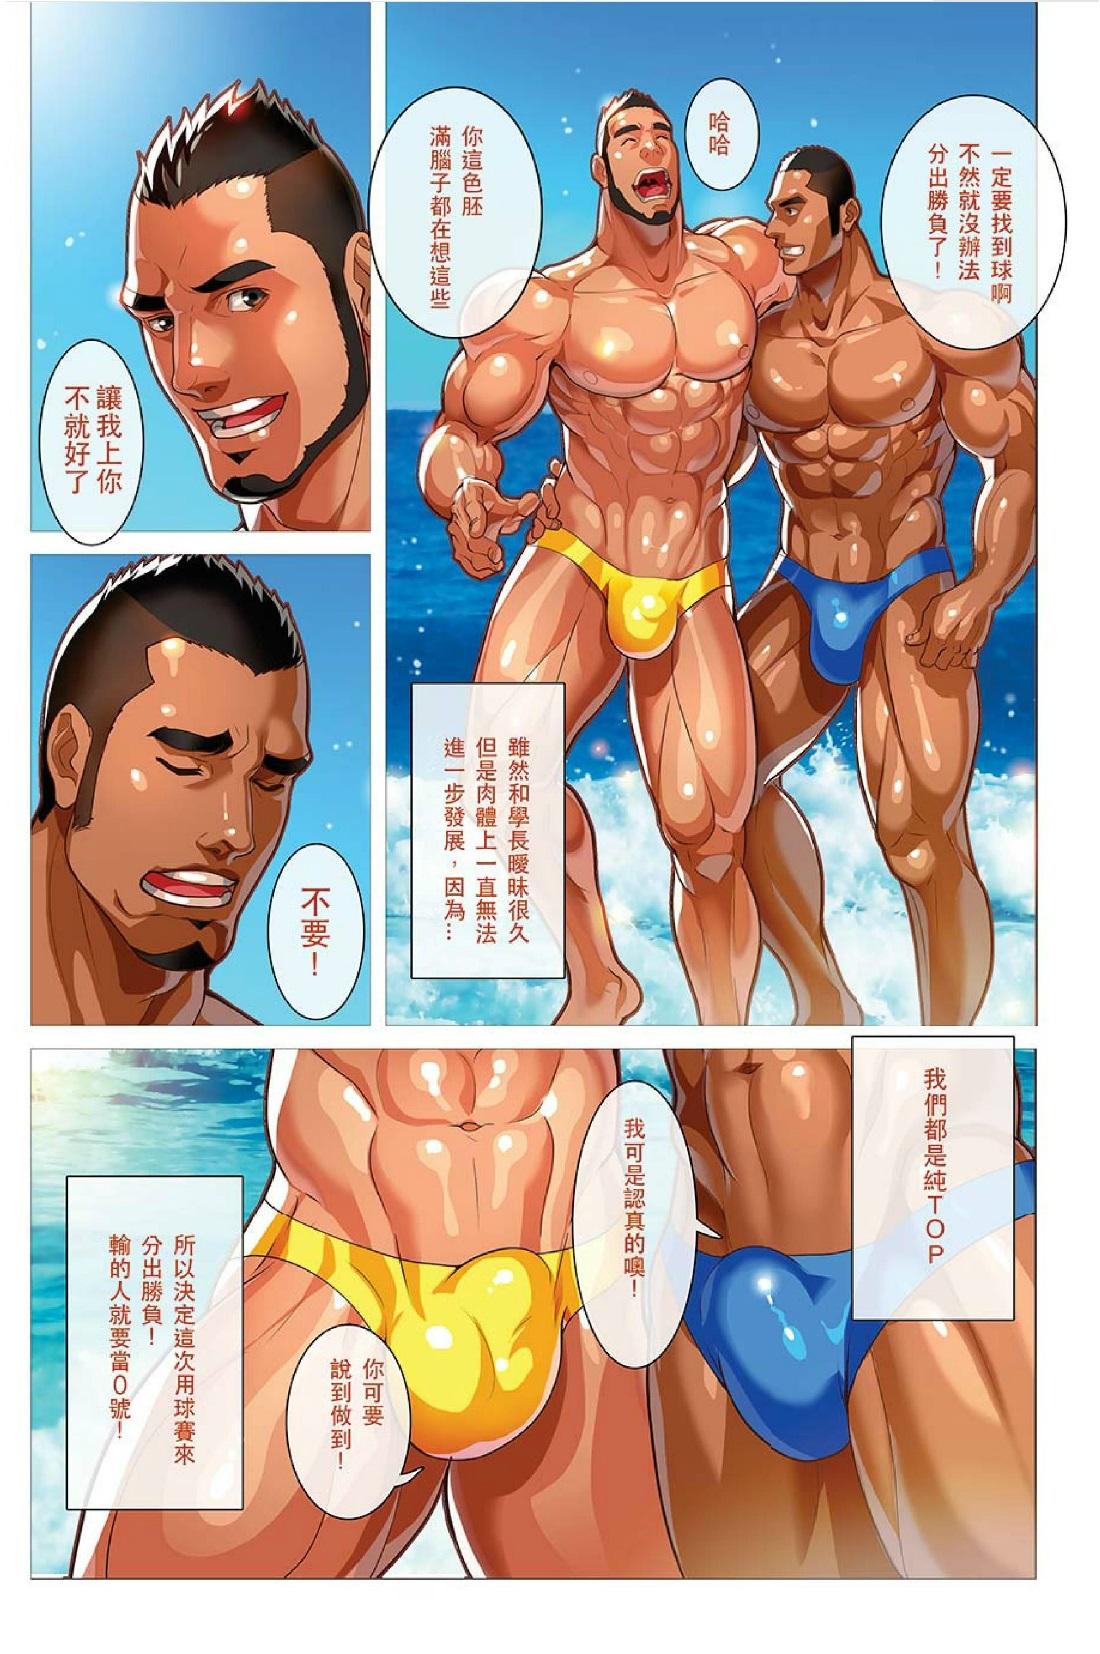 Blowjob 夏日男子筋肉潛艇堡 (Summer's end Muscle Heat - The Boys Of Summer 2015) by 大雄 (Da Sexy Xiong) + Bonus Prequel [CH] Baile - Page 4